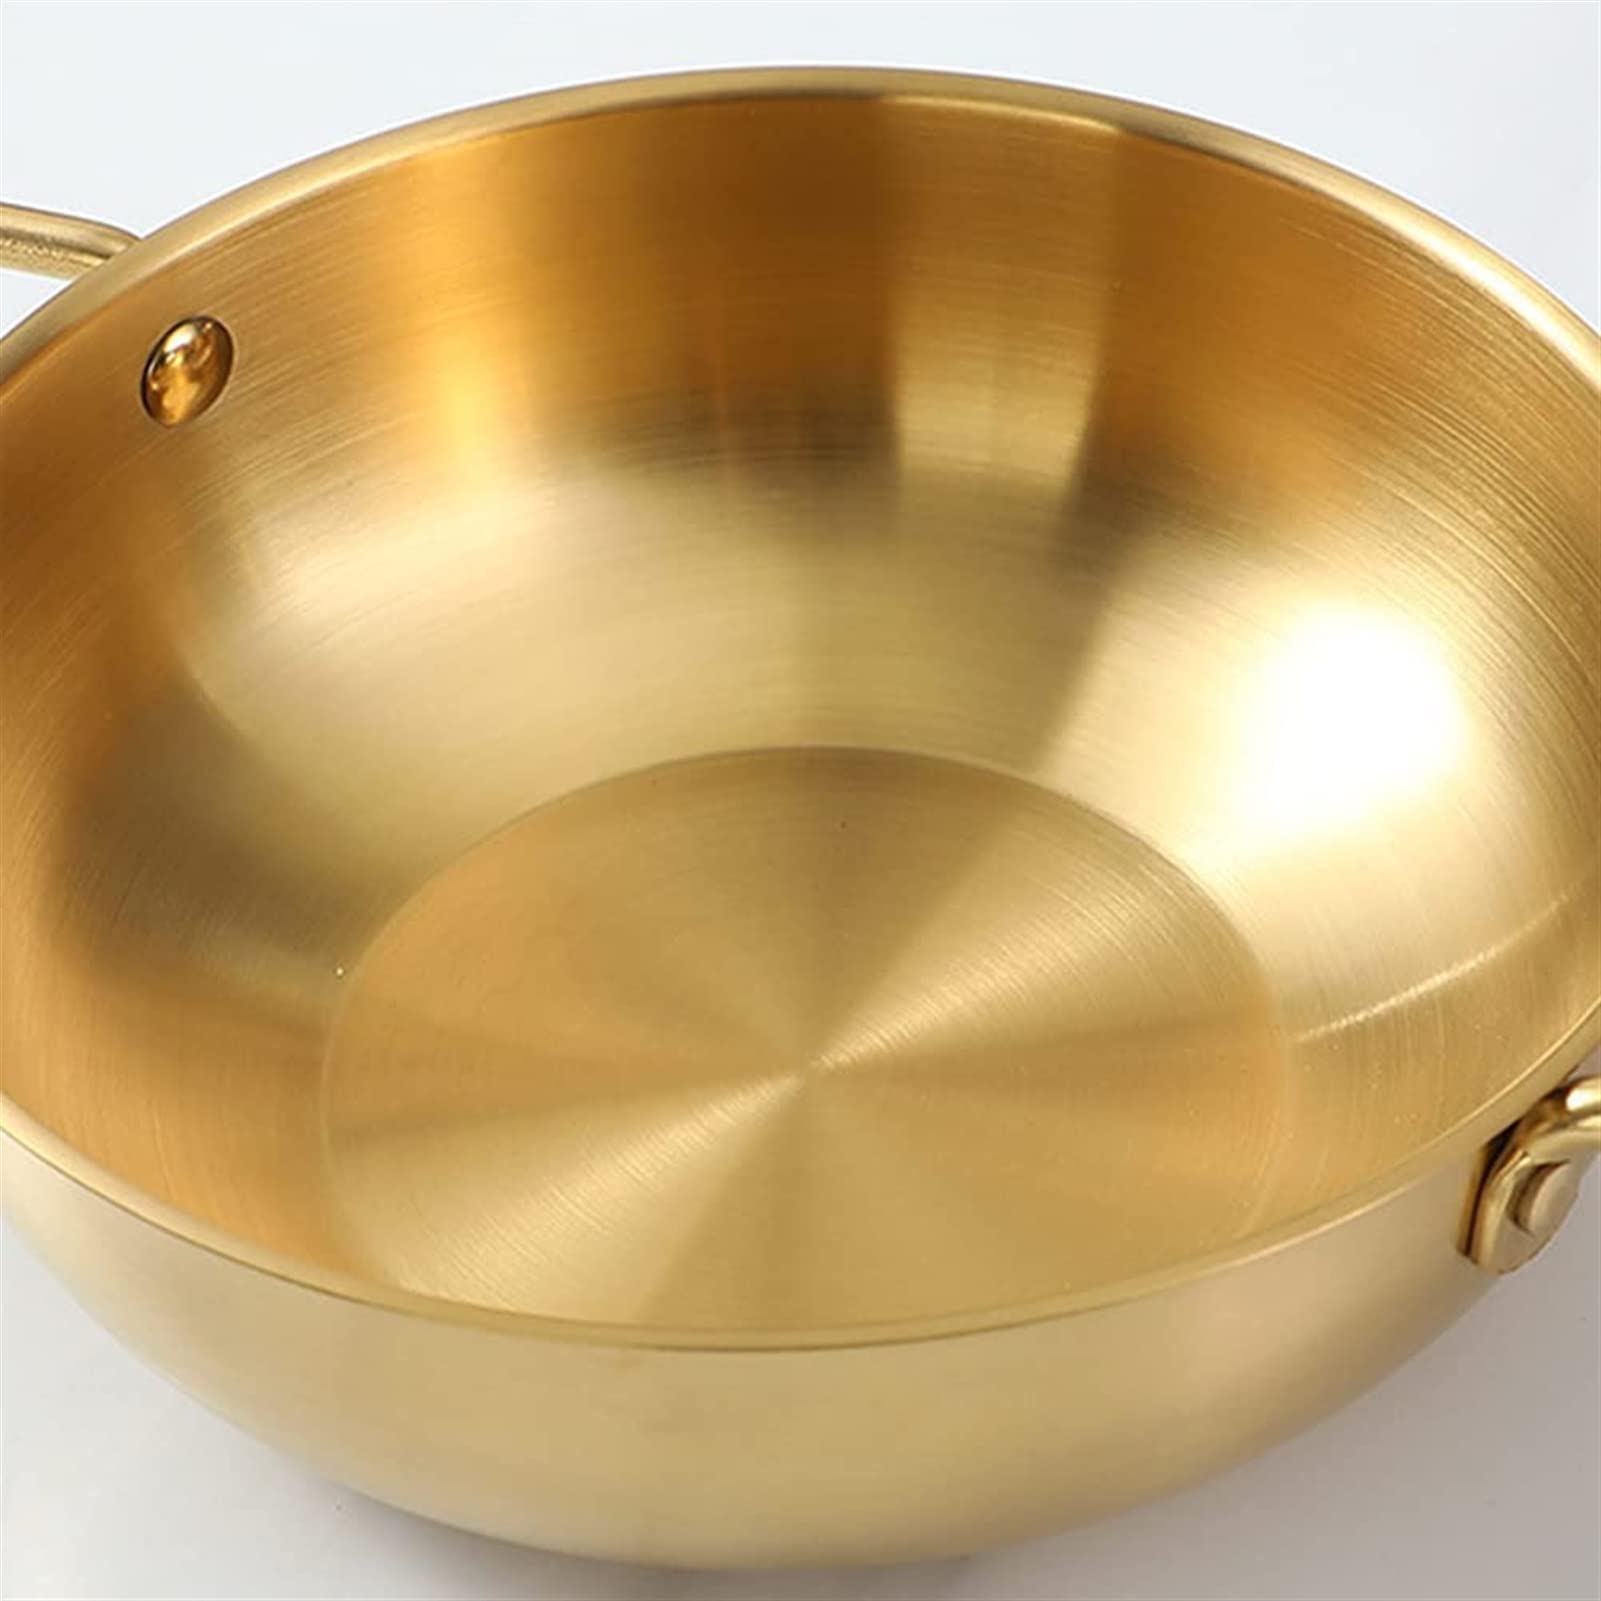 26cm Gold Seafood Paella Pan with Riveted Chrome Plated Handles Dishwasher Safe